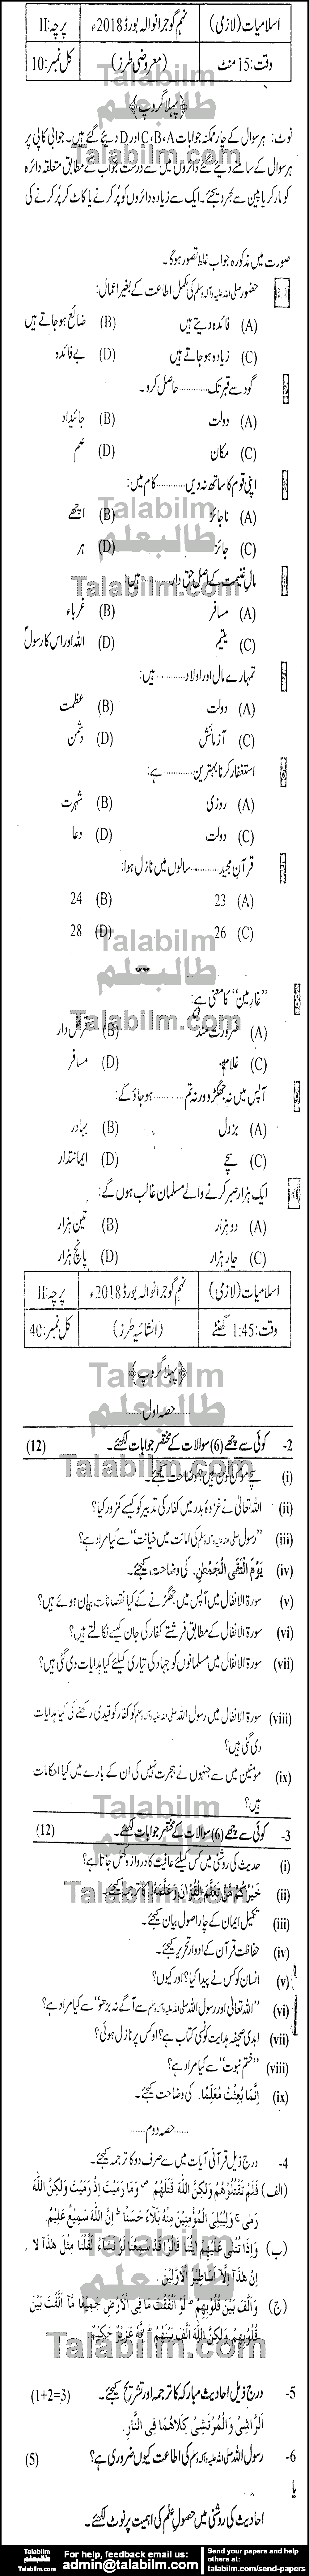 Islamiat Compulsory 0 past paper for 2018 Group-I